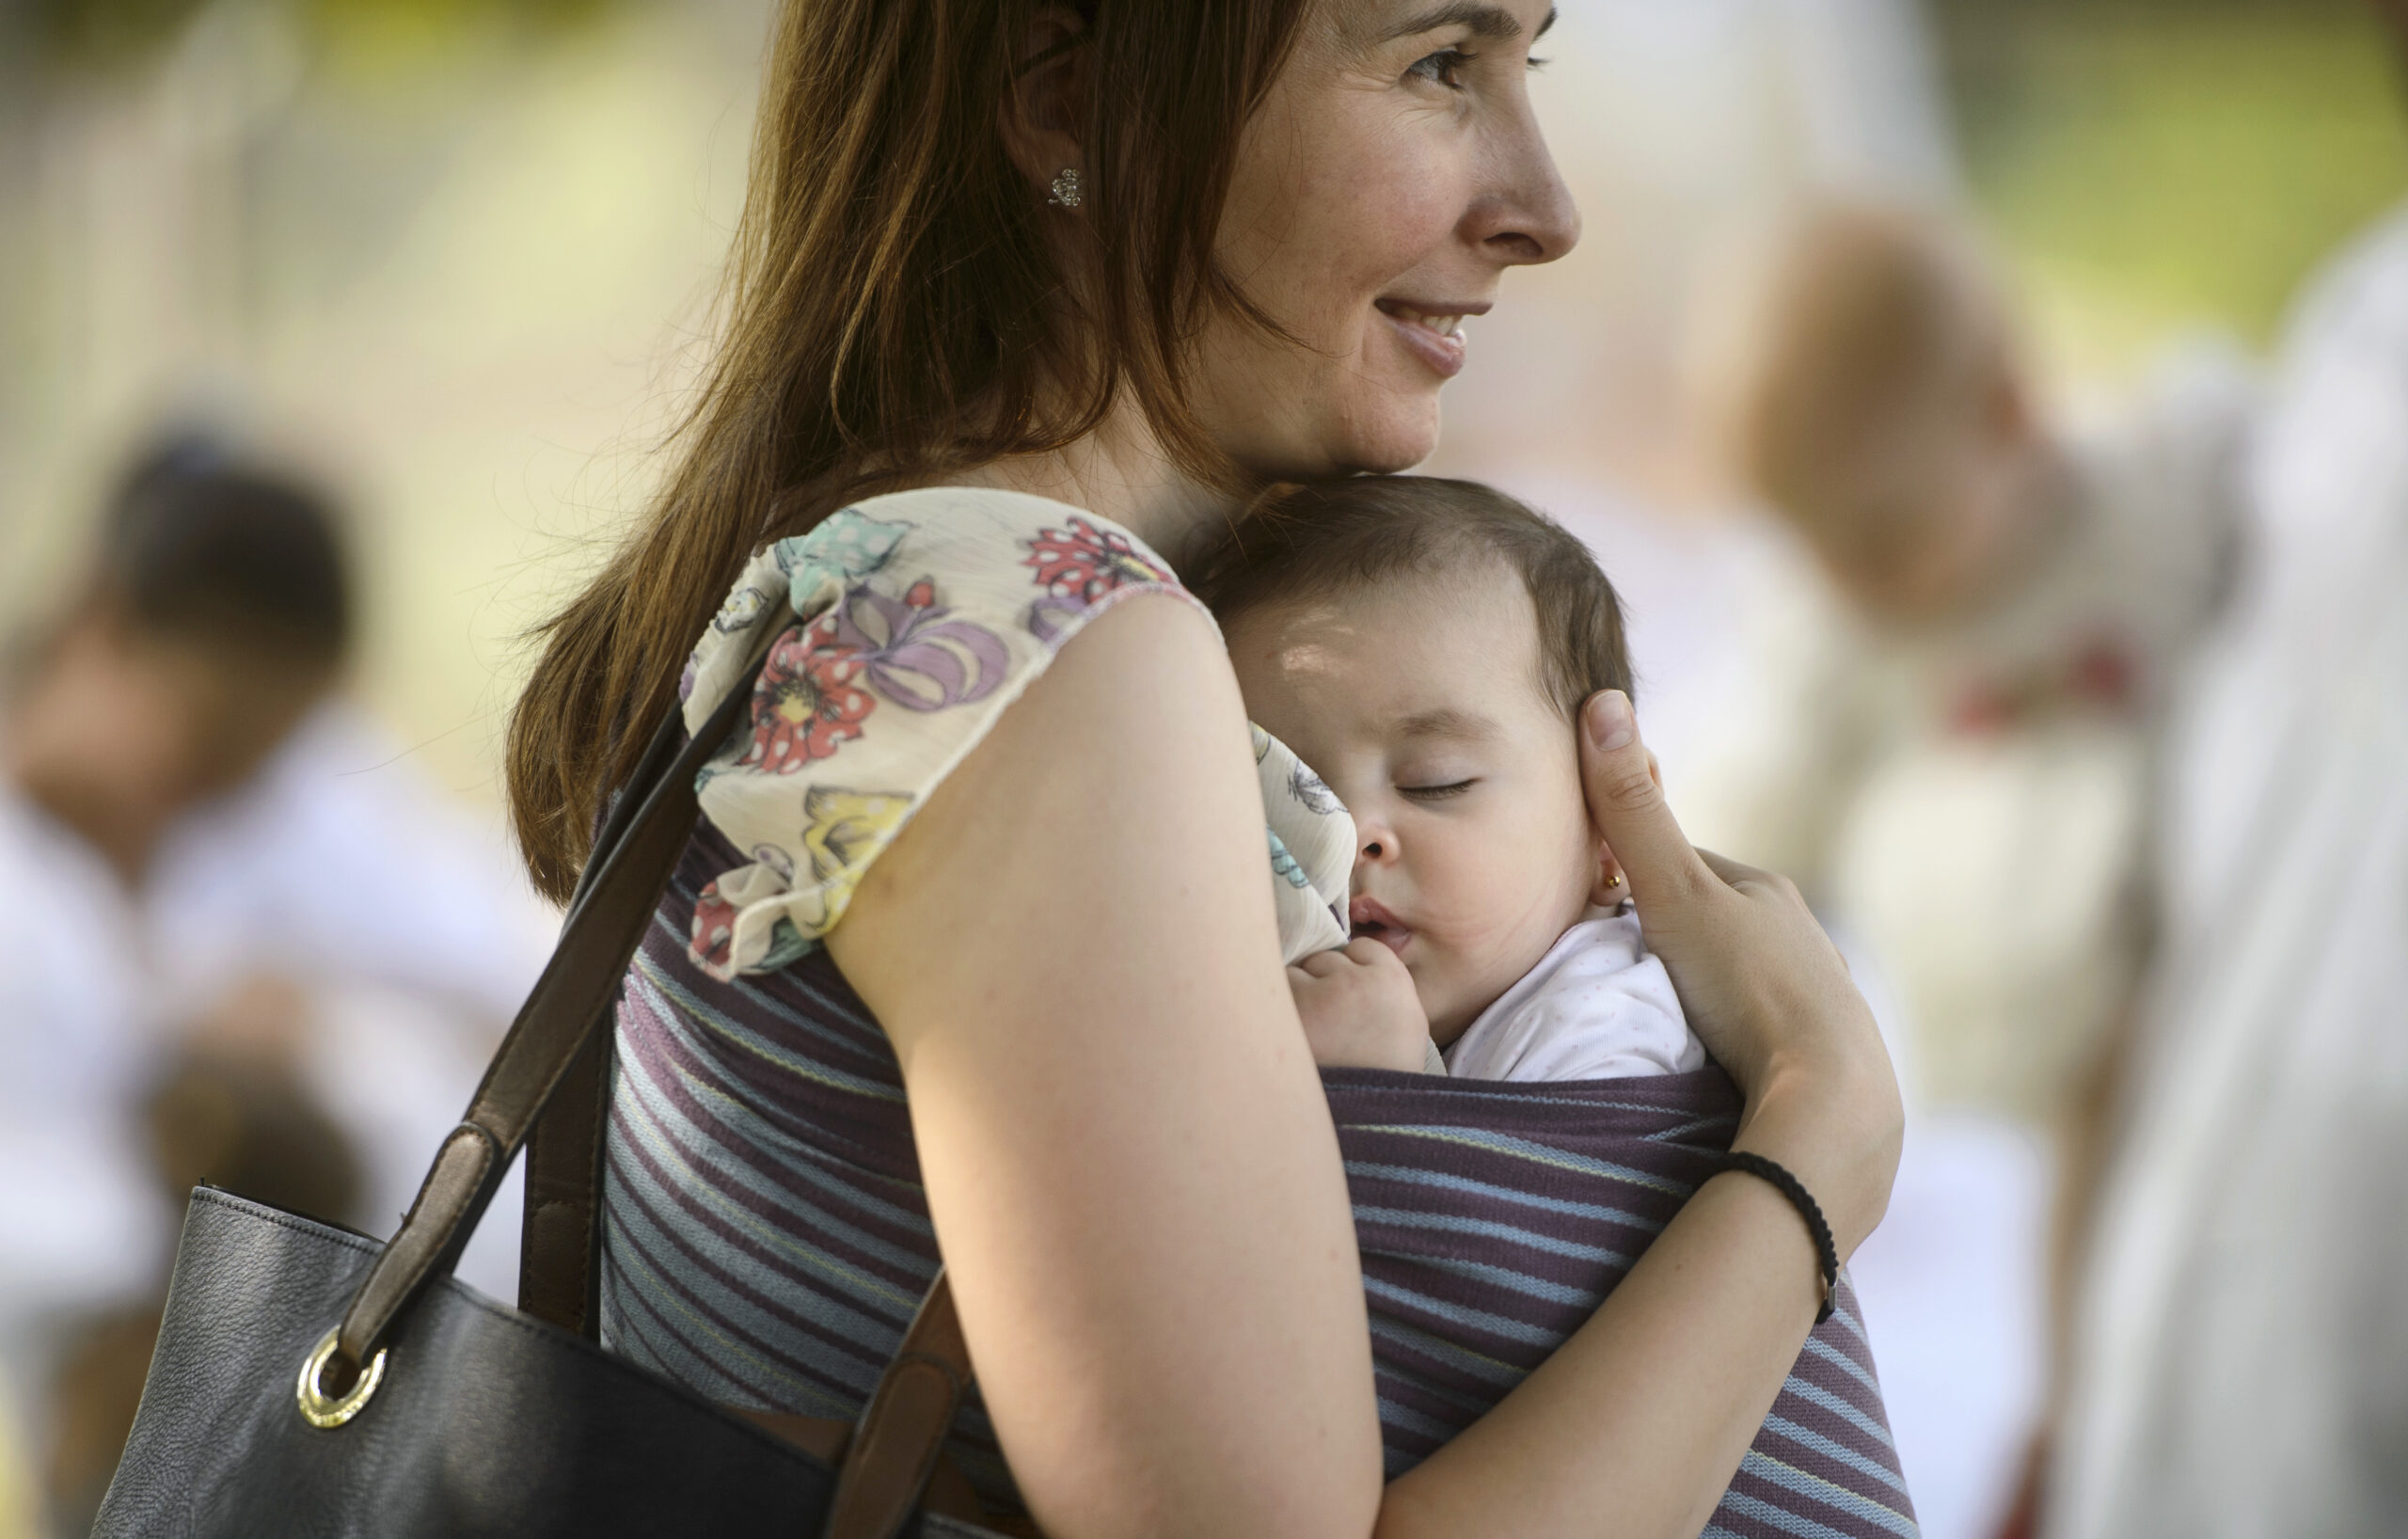 Indianapolis Moms: Health and well-being in breastfeeding